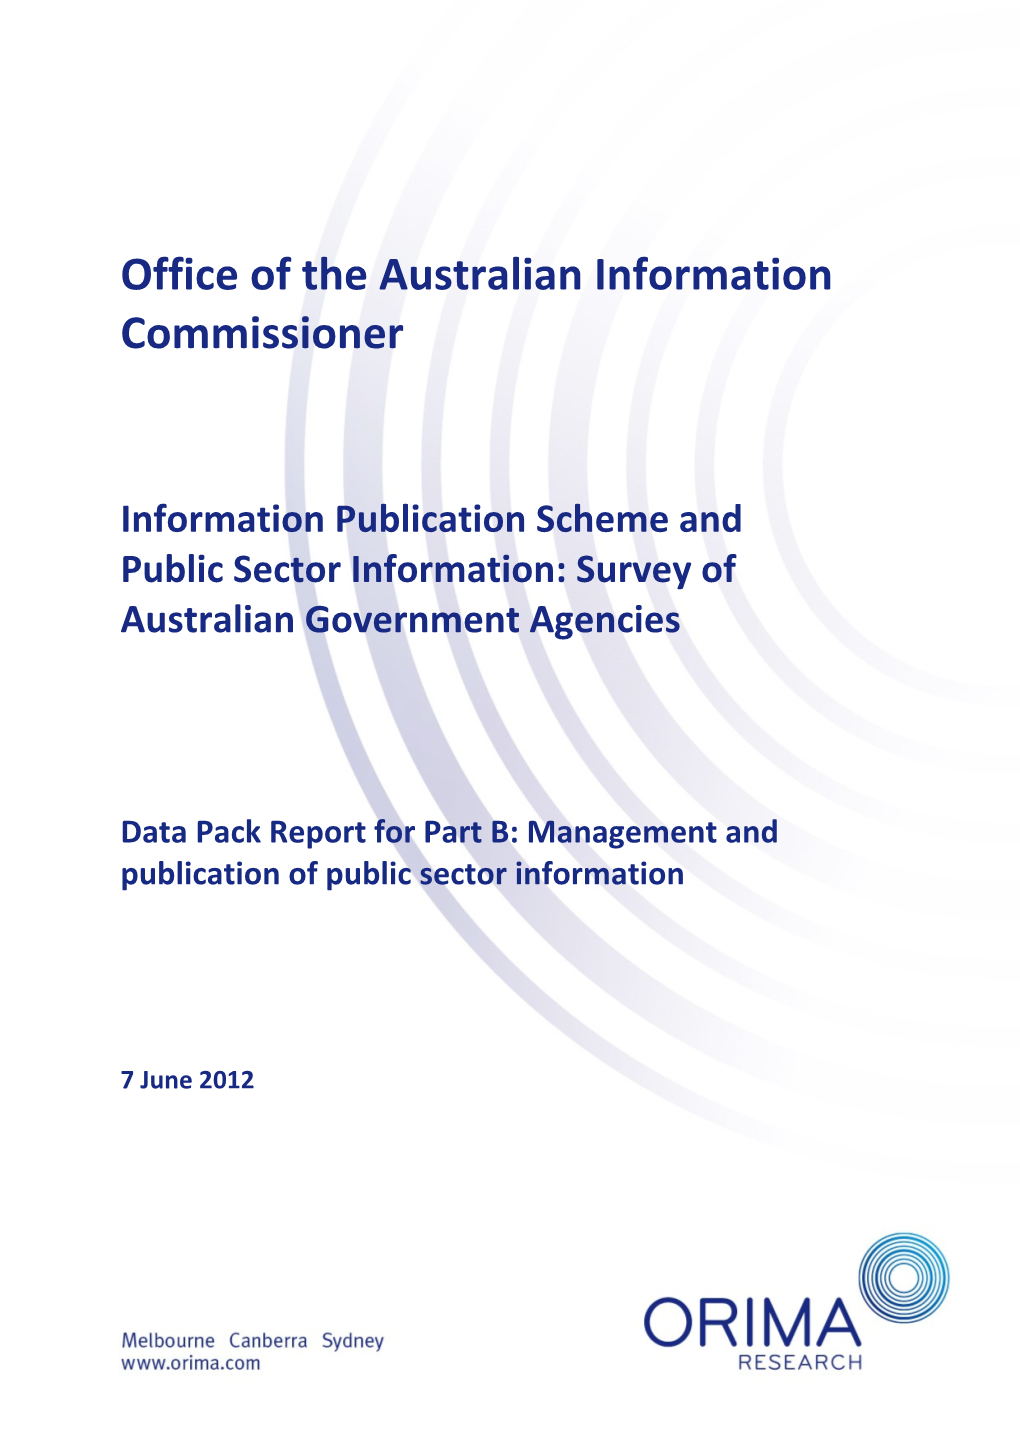 Public Sector Information Survey Introduction and Methodology